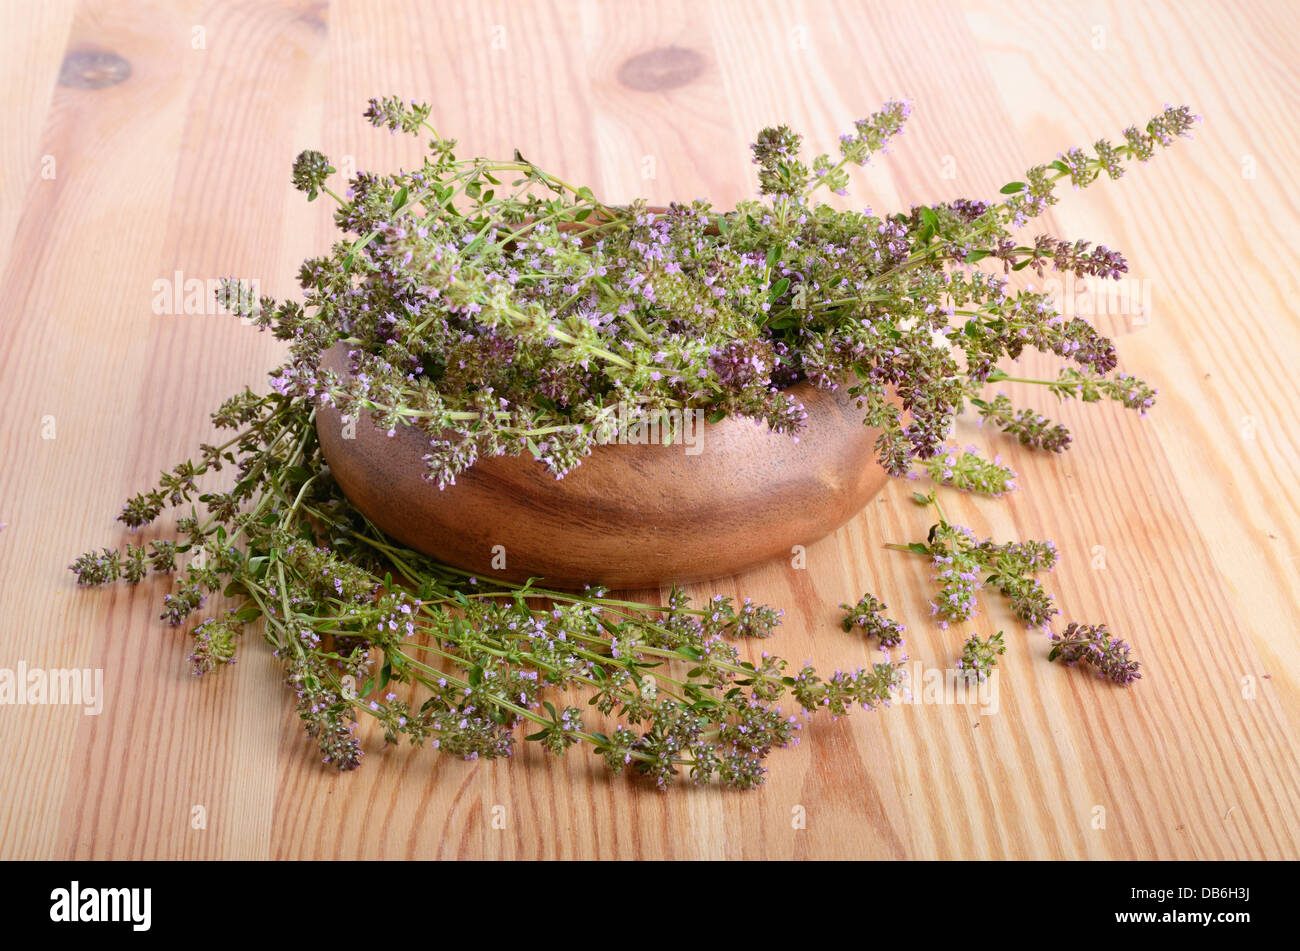 Thyme flowers close-up in a wood bowl on plank table background Stock Photo